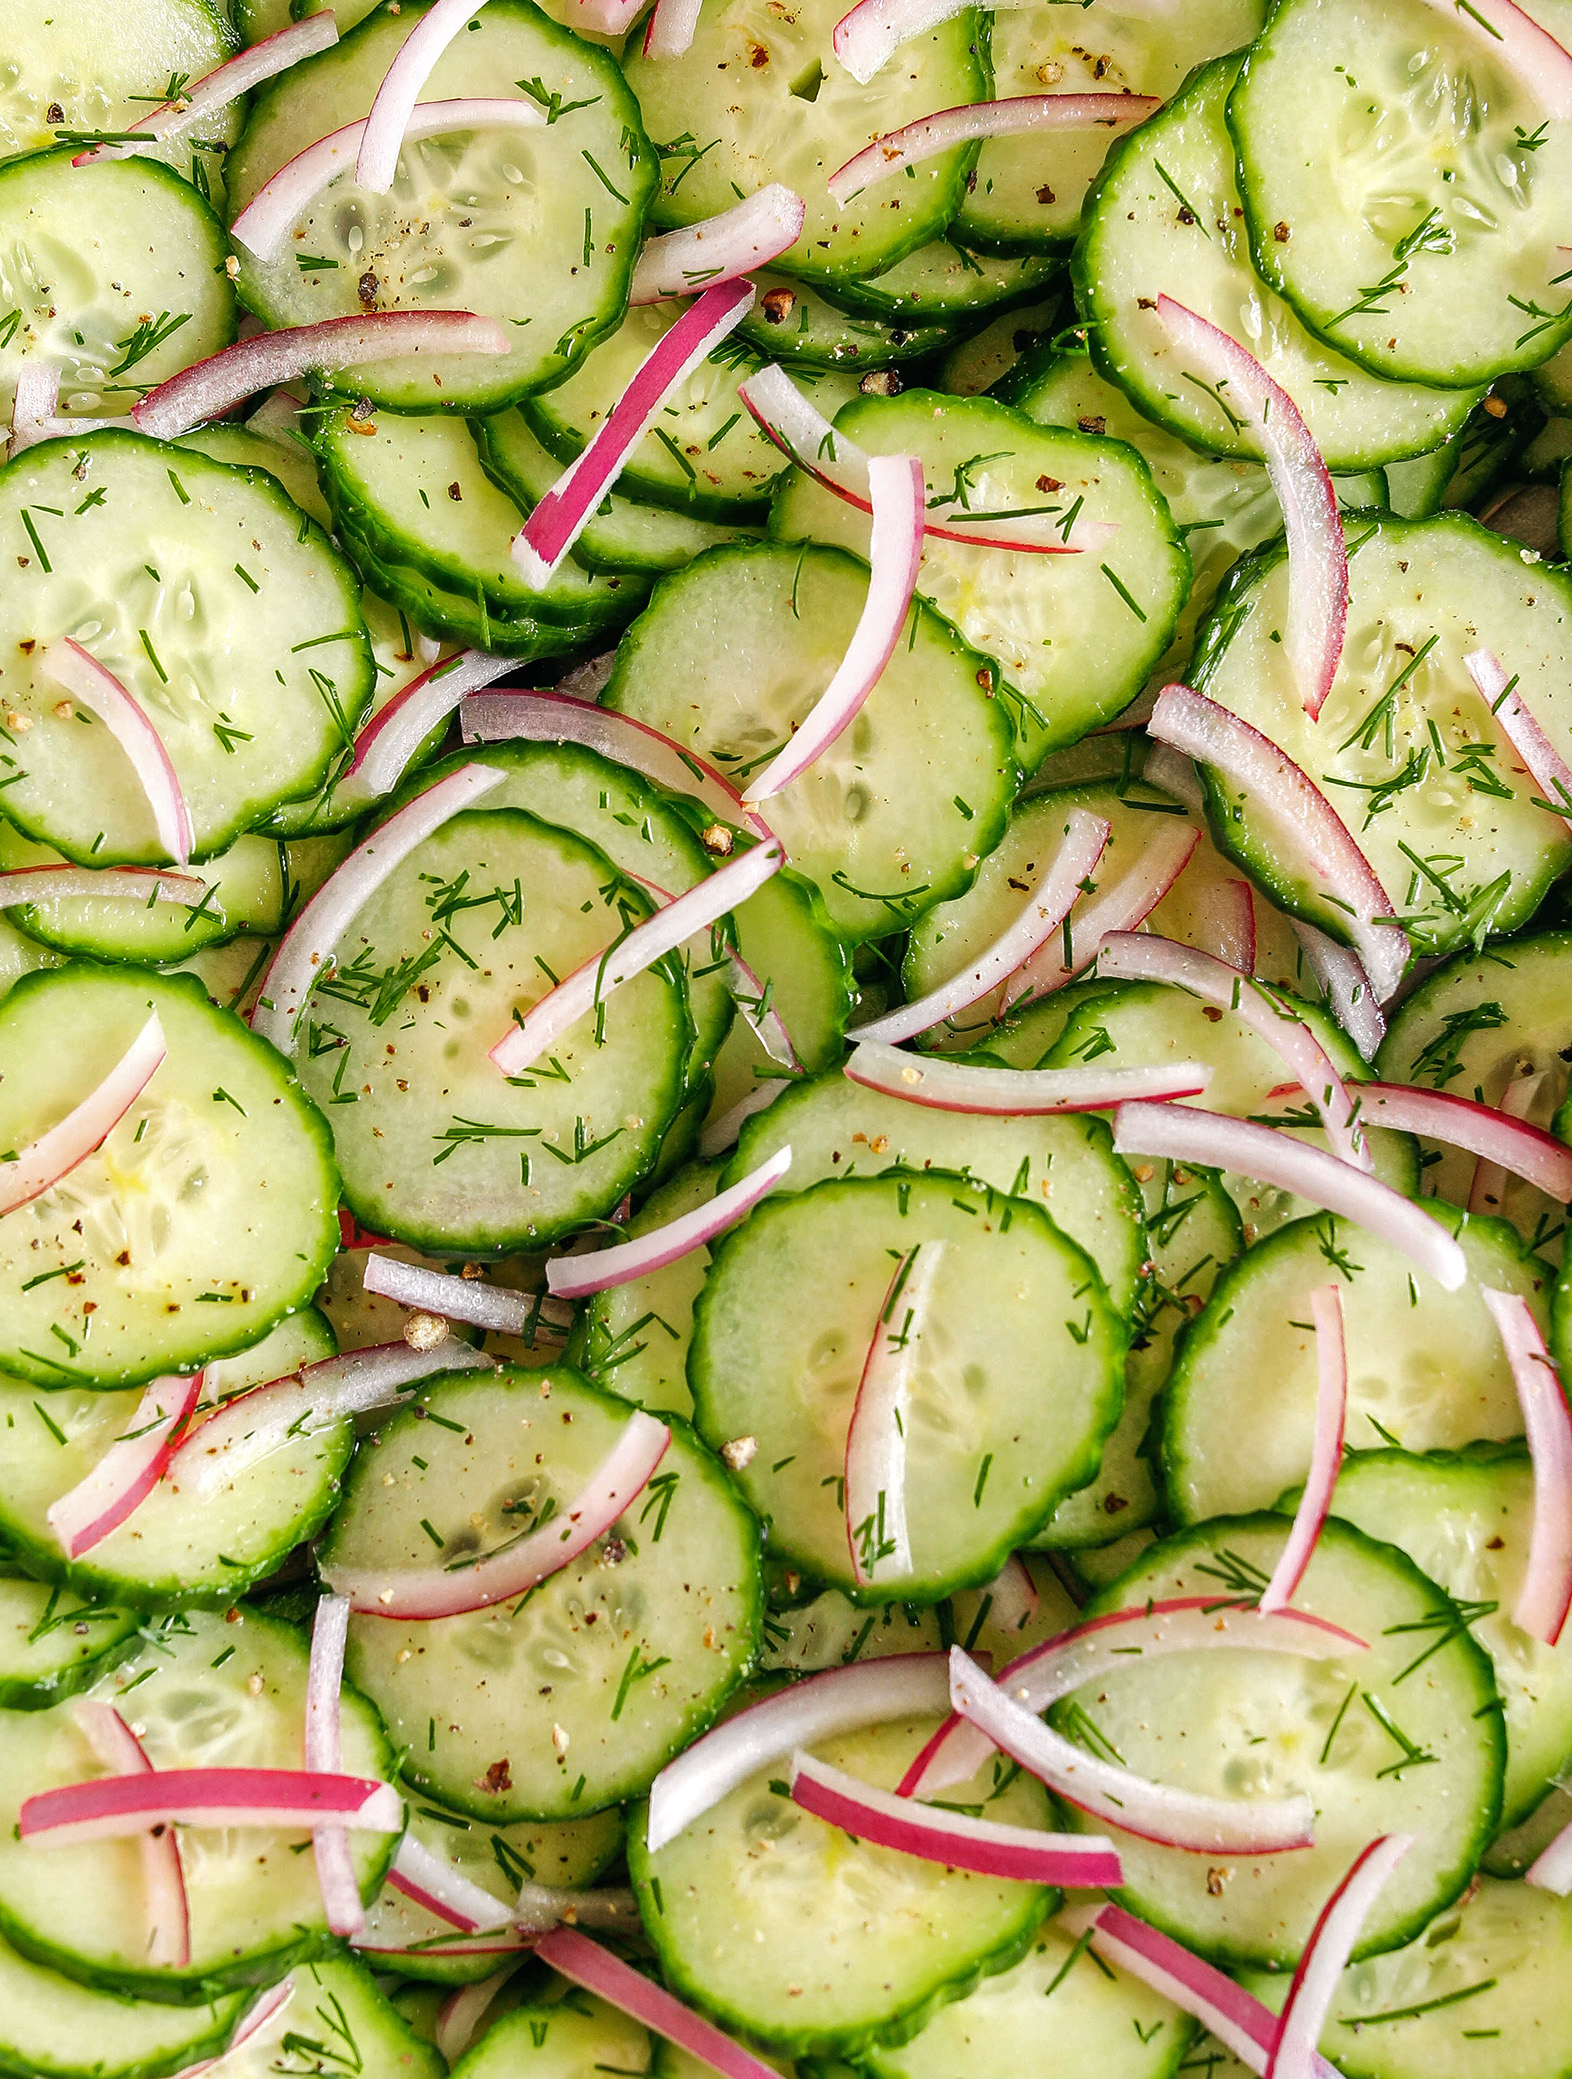 This Sweet Cucumber Salad is made with crisp cucumbers, slices of red onion and fresh dill all tossed in a sweet and tangy vinaigrette that easily comes together in less than 10 minutes!  Perfect summer side dish that is light and refreshing!